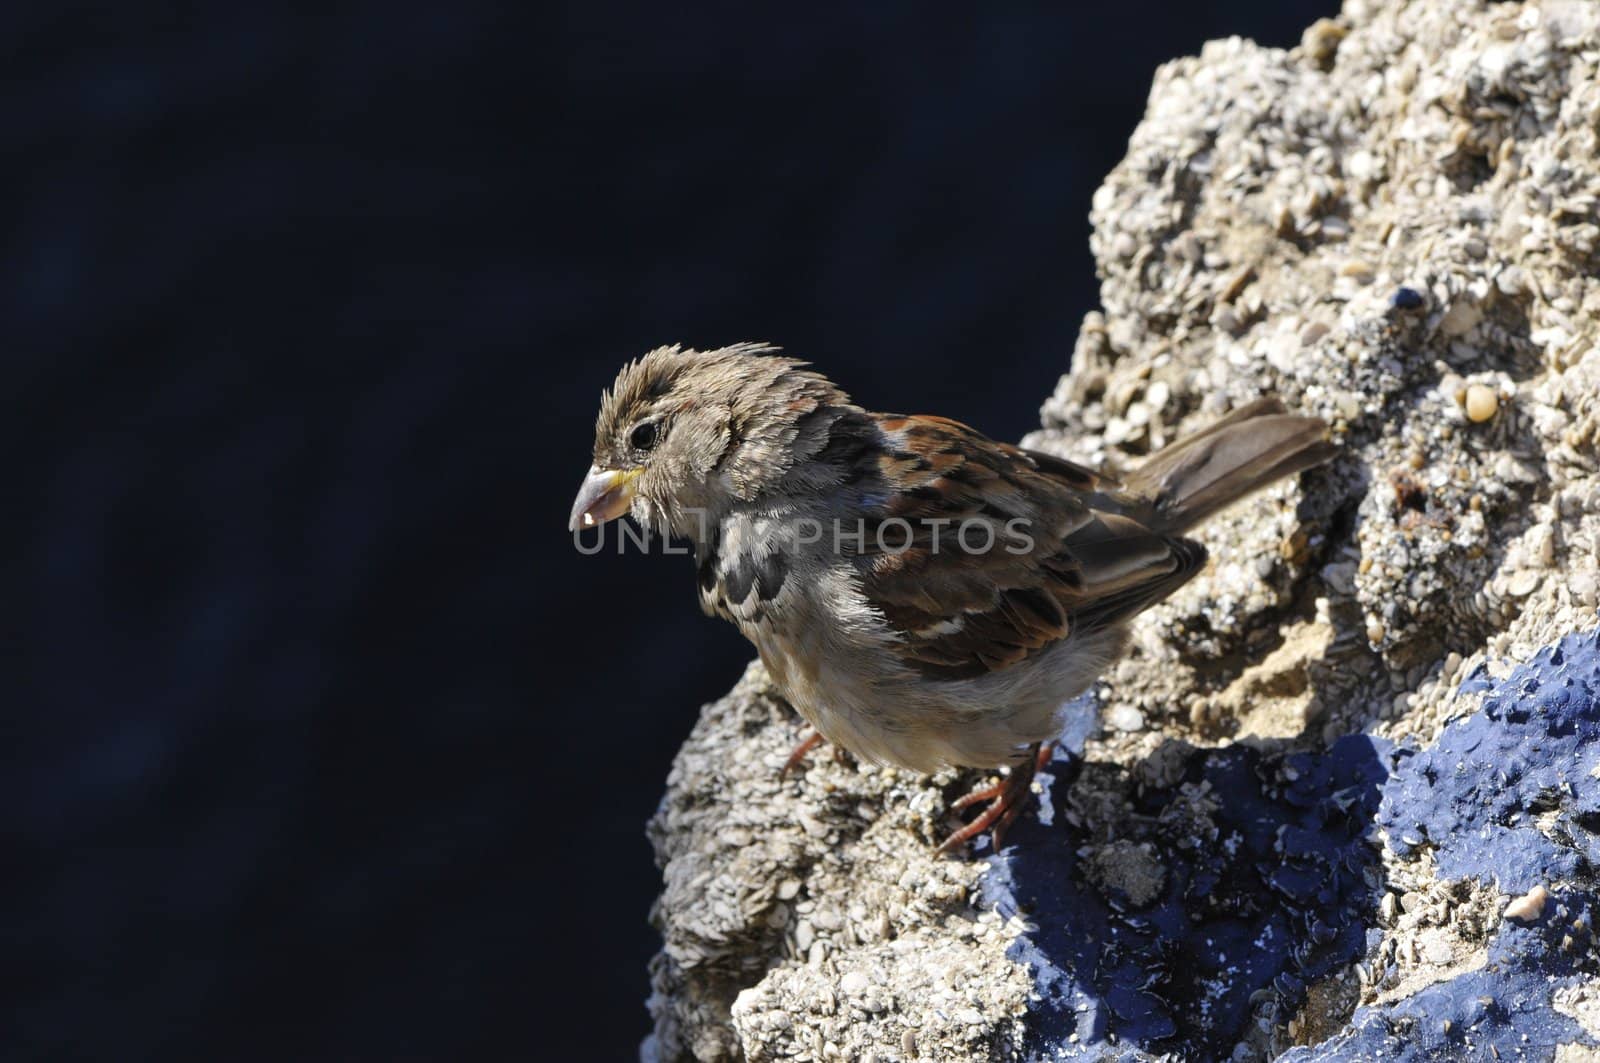 Close-up on a little sparrow on a rock